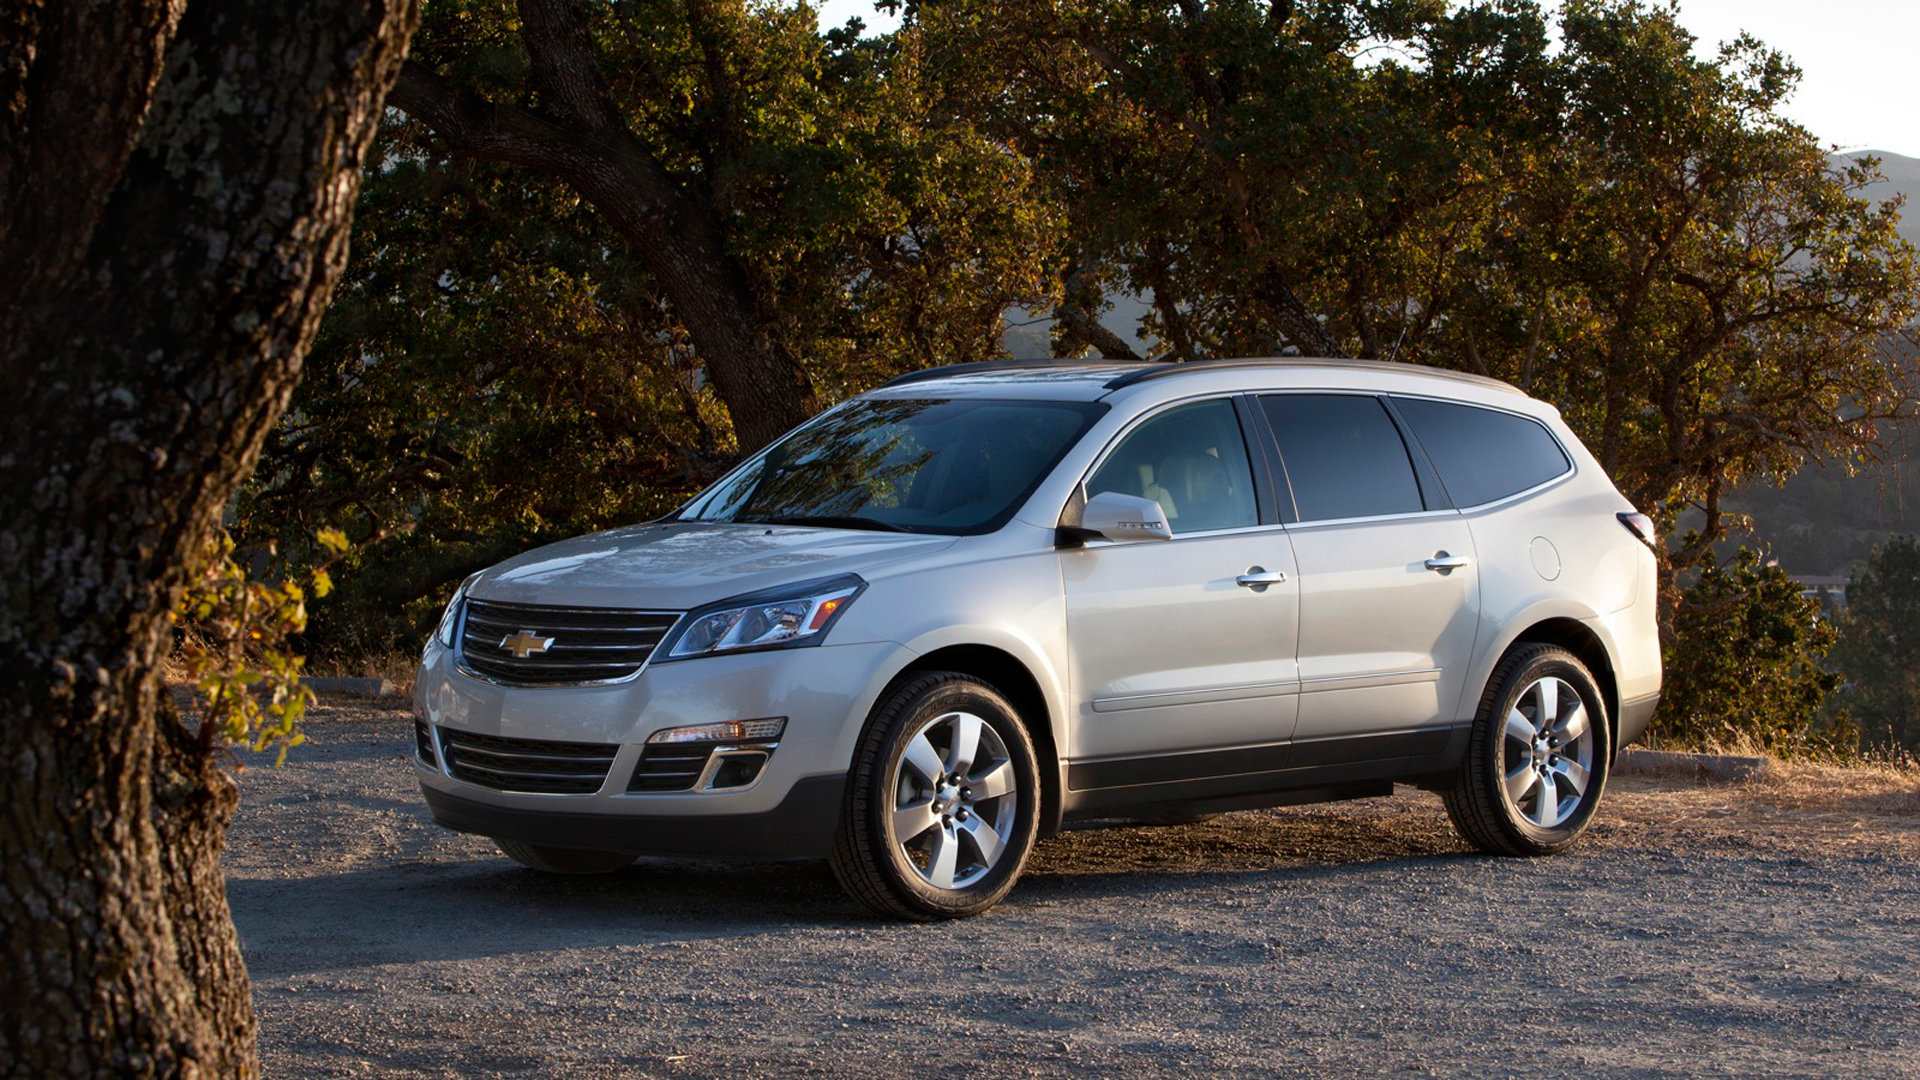 Review: 2014 Chevrolet Traverse - The New York Times